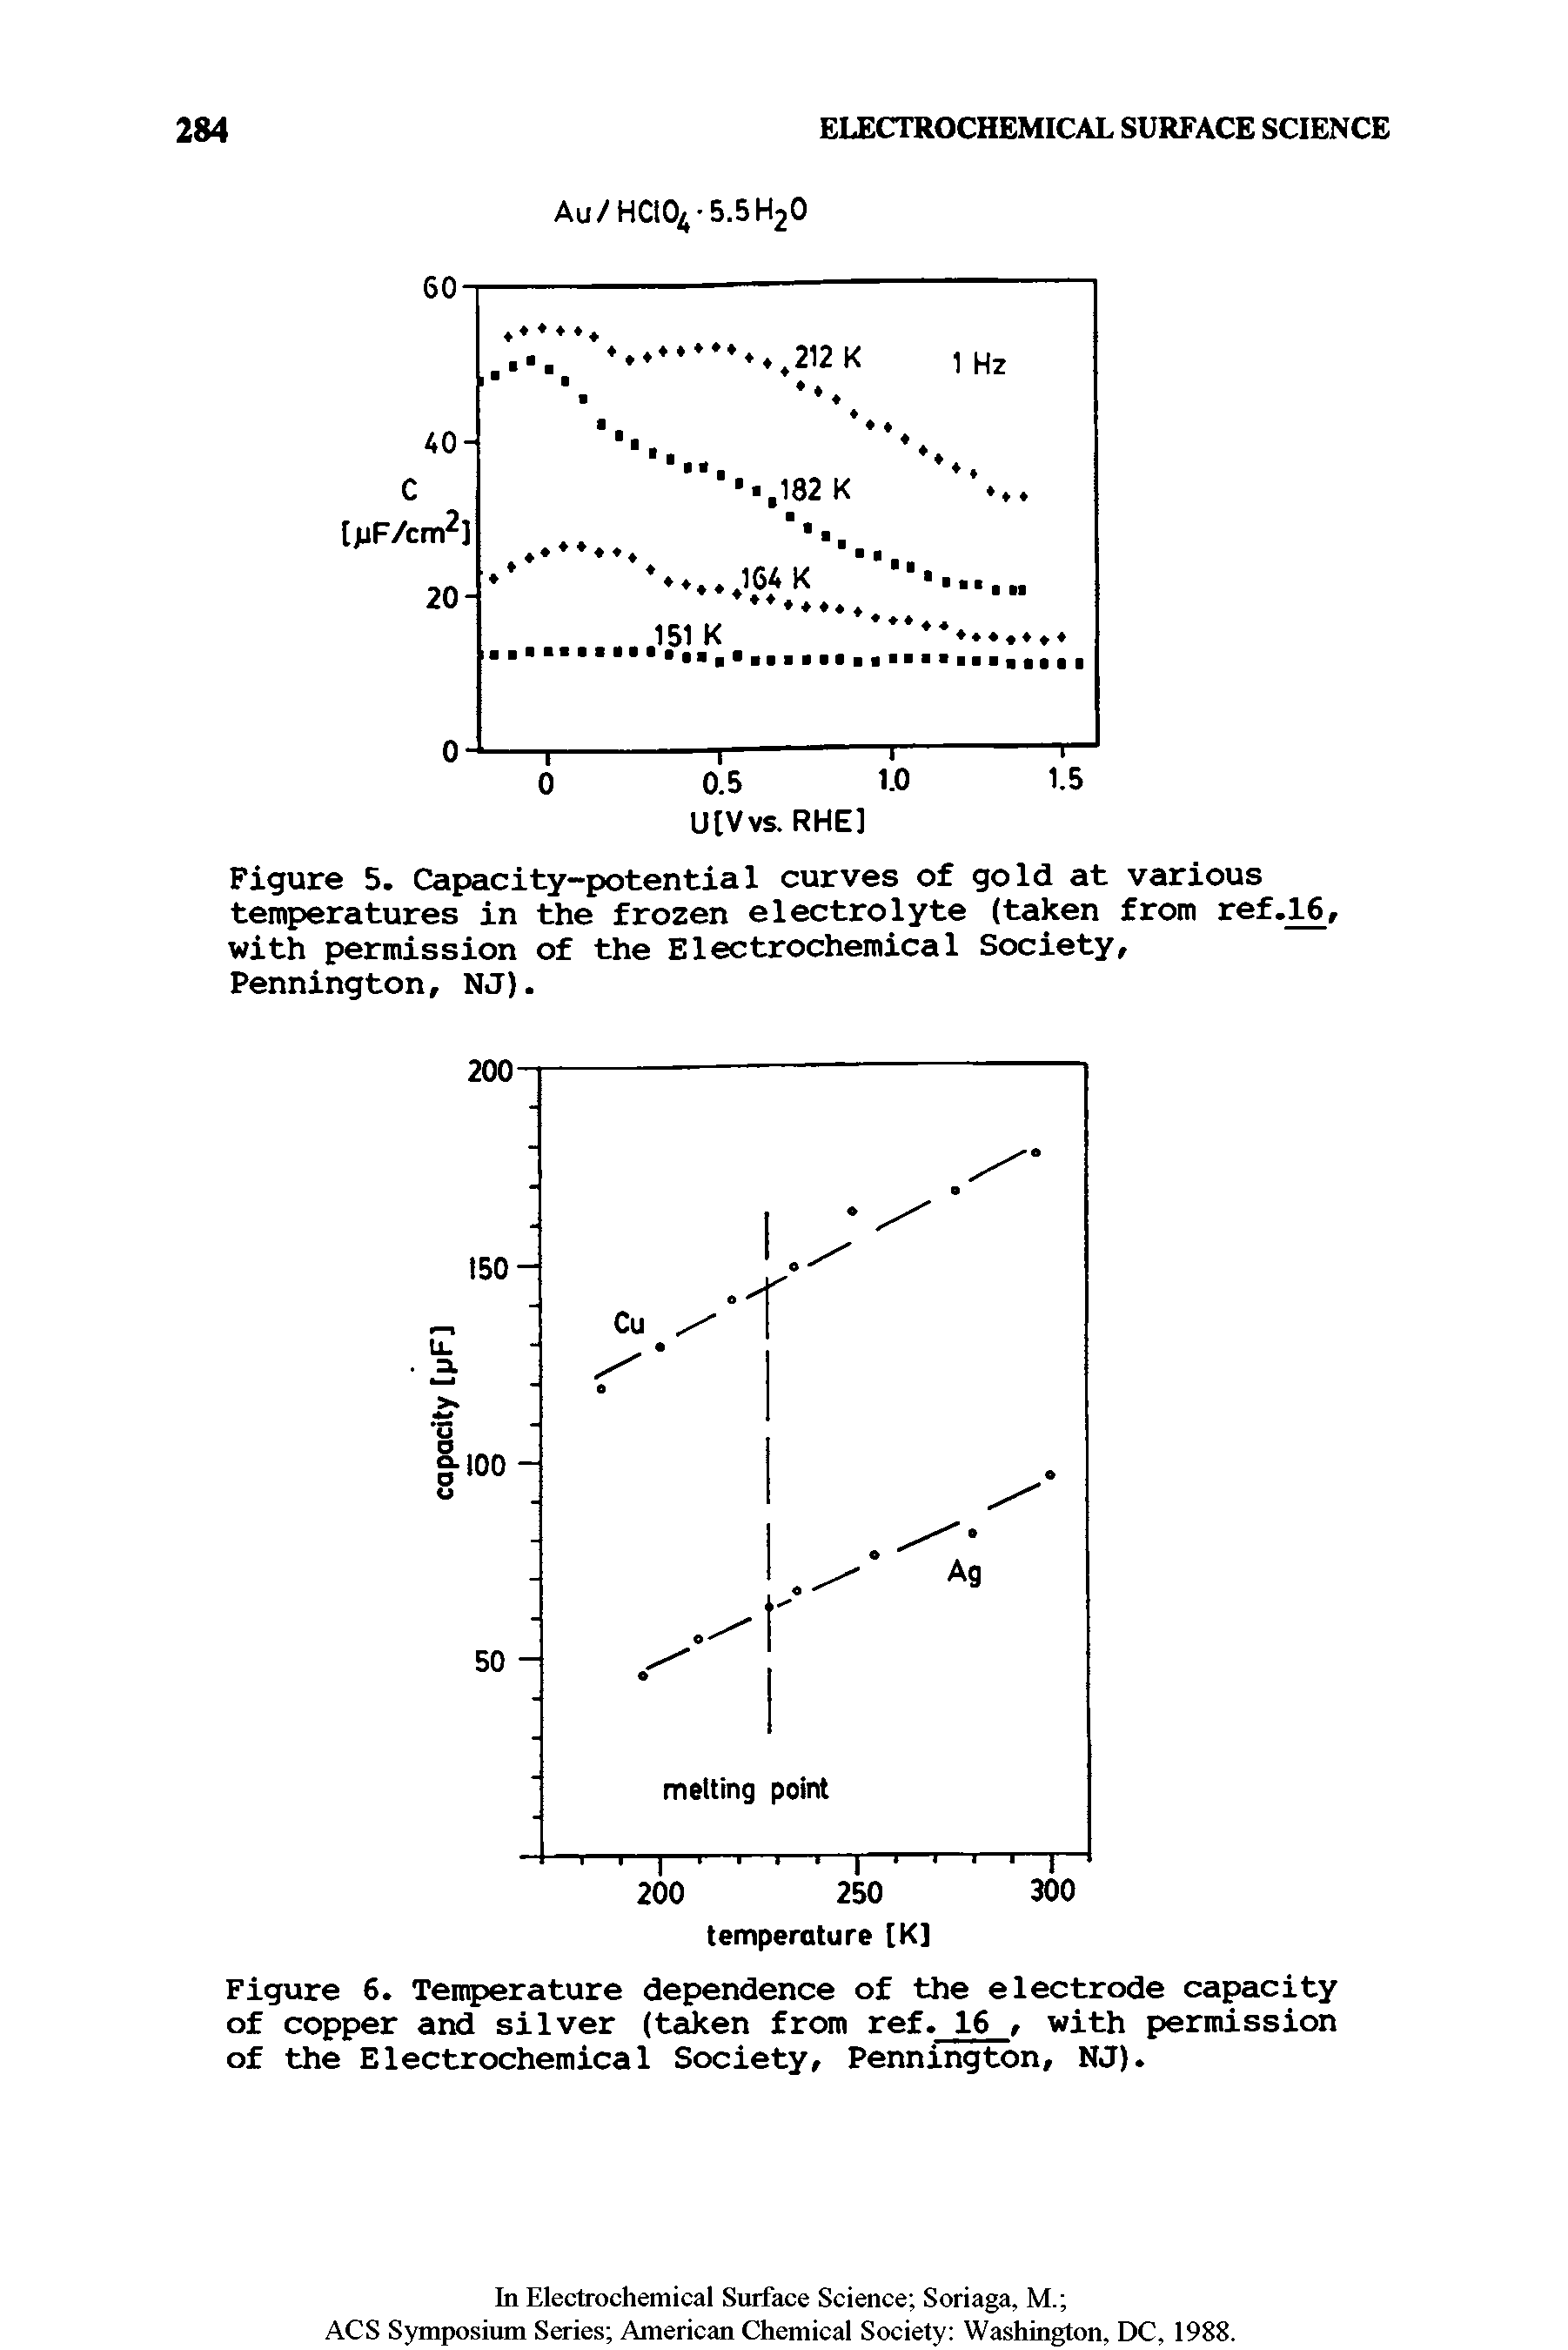 Figure 5. Capacity-potential curves of gold at various temperatures in the frozen electrolyte (taken from ref.16, with permission of the Electrochemical Society,...